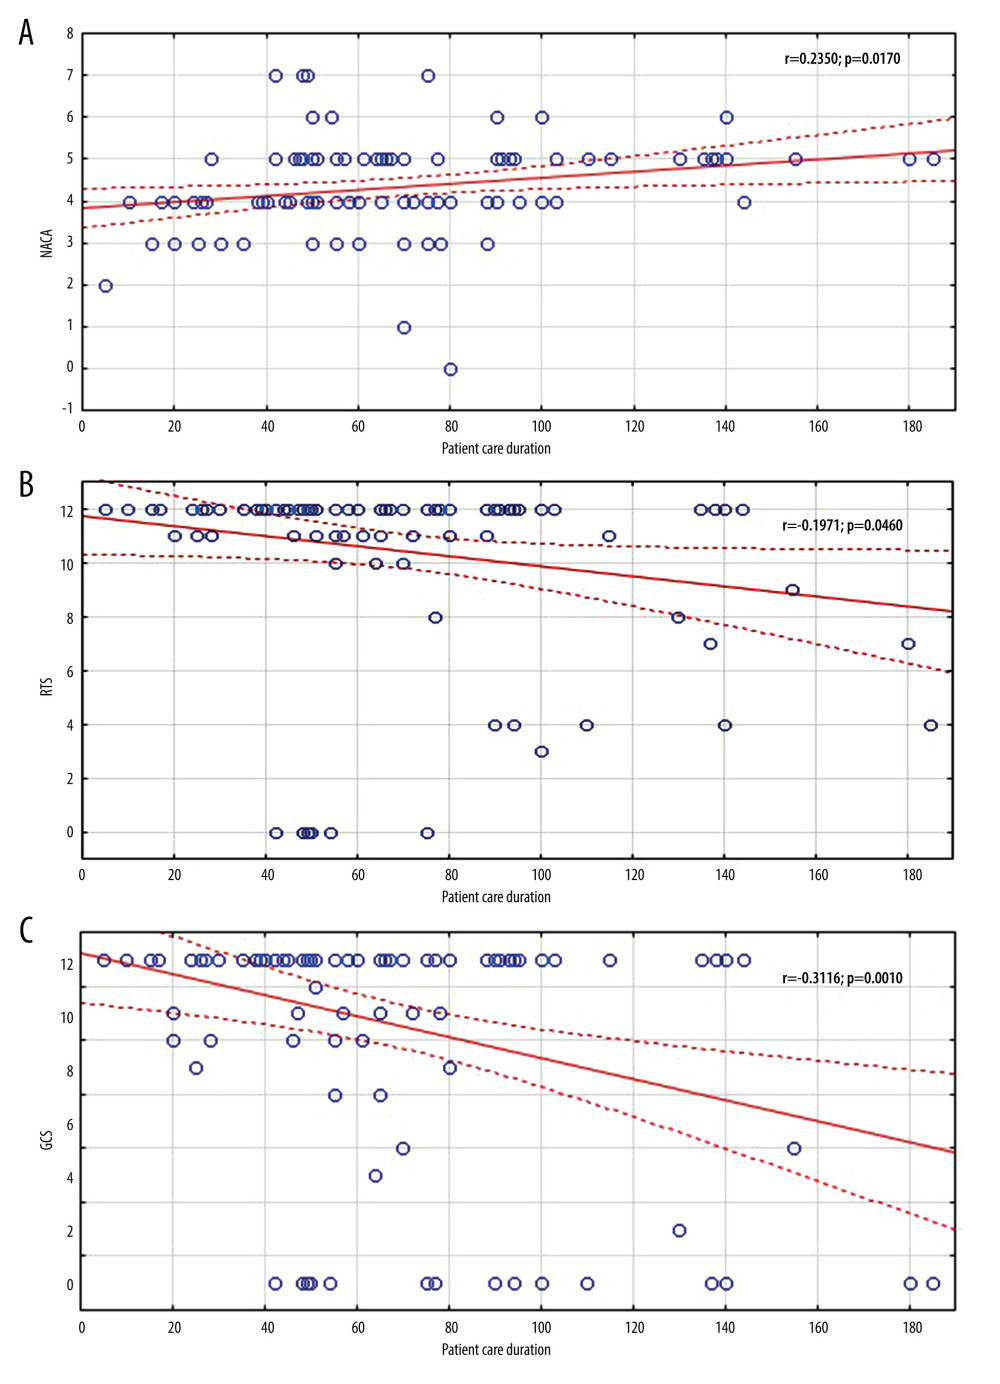 Correlation between patient care duration and NACA (A), RTS (B), and GCS (C) scores.